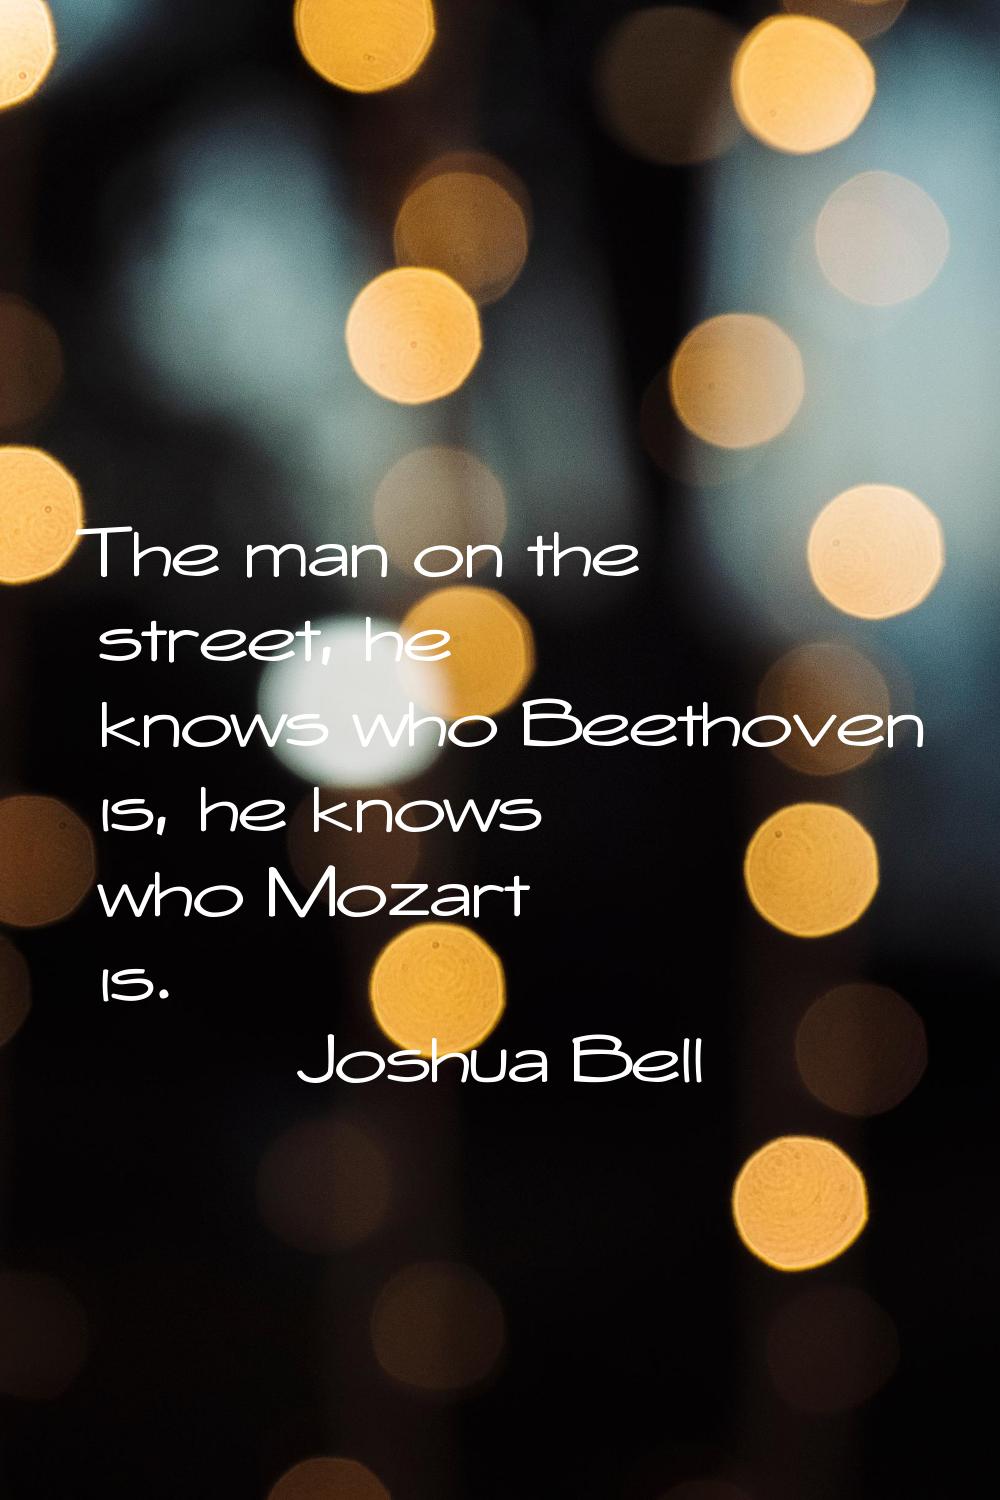 The man on the street, he knows who Beethoven is, he knows who Mozart is.